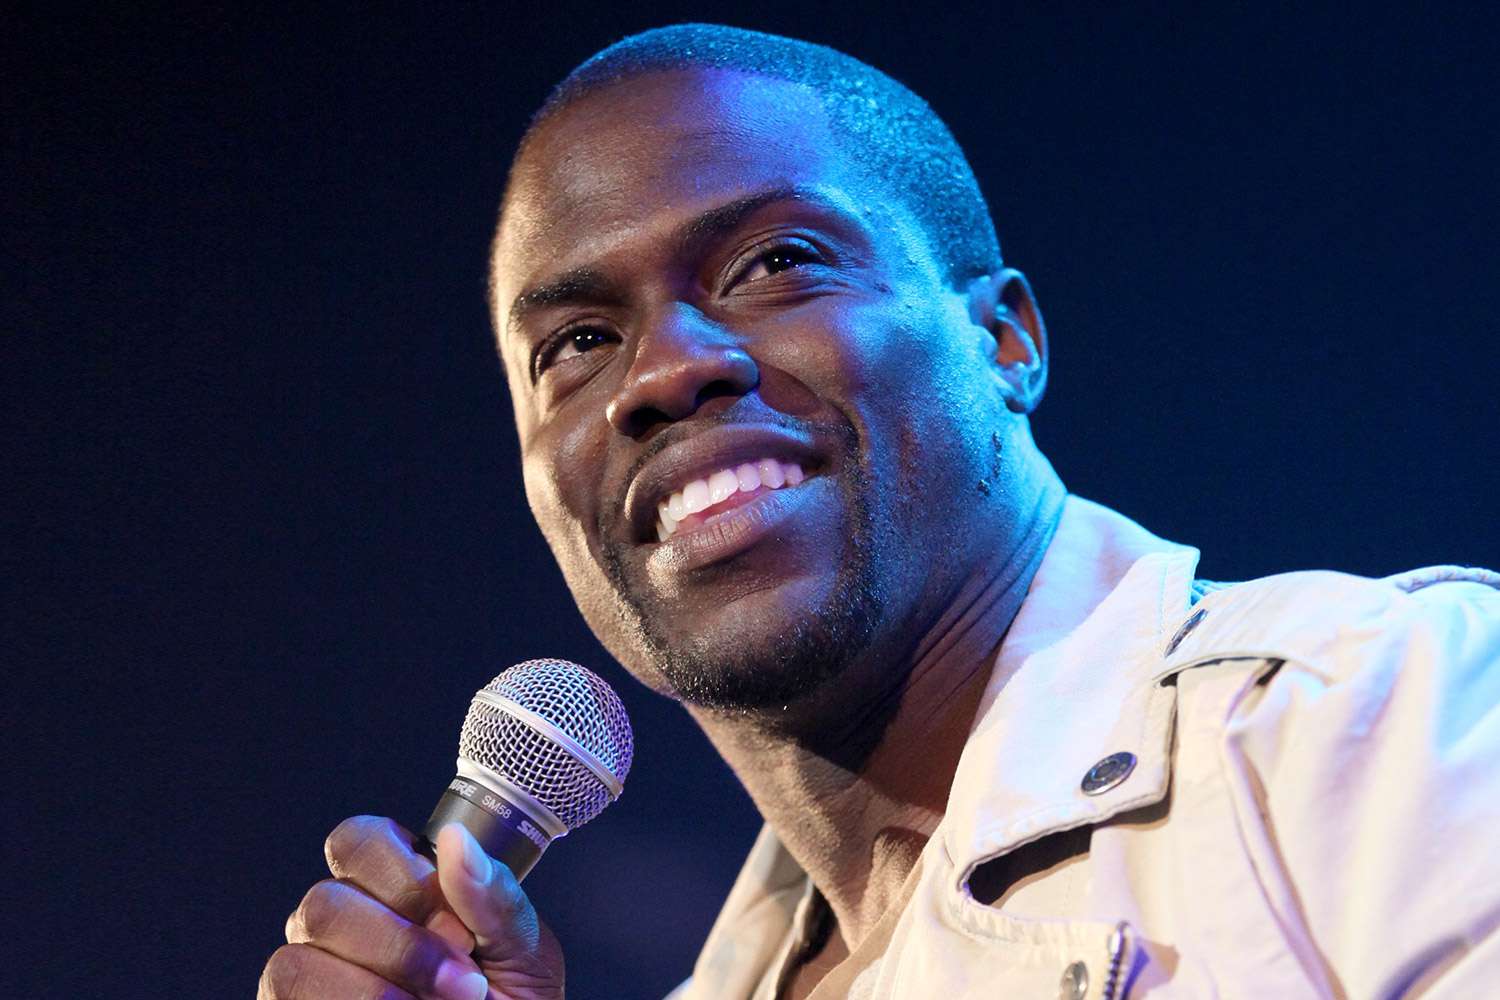 Kevin Hart denounces cancel culture: 'Shut the f--- up! What are you talking about?' - EW.com